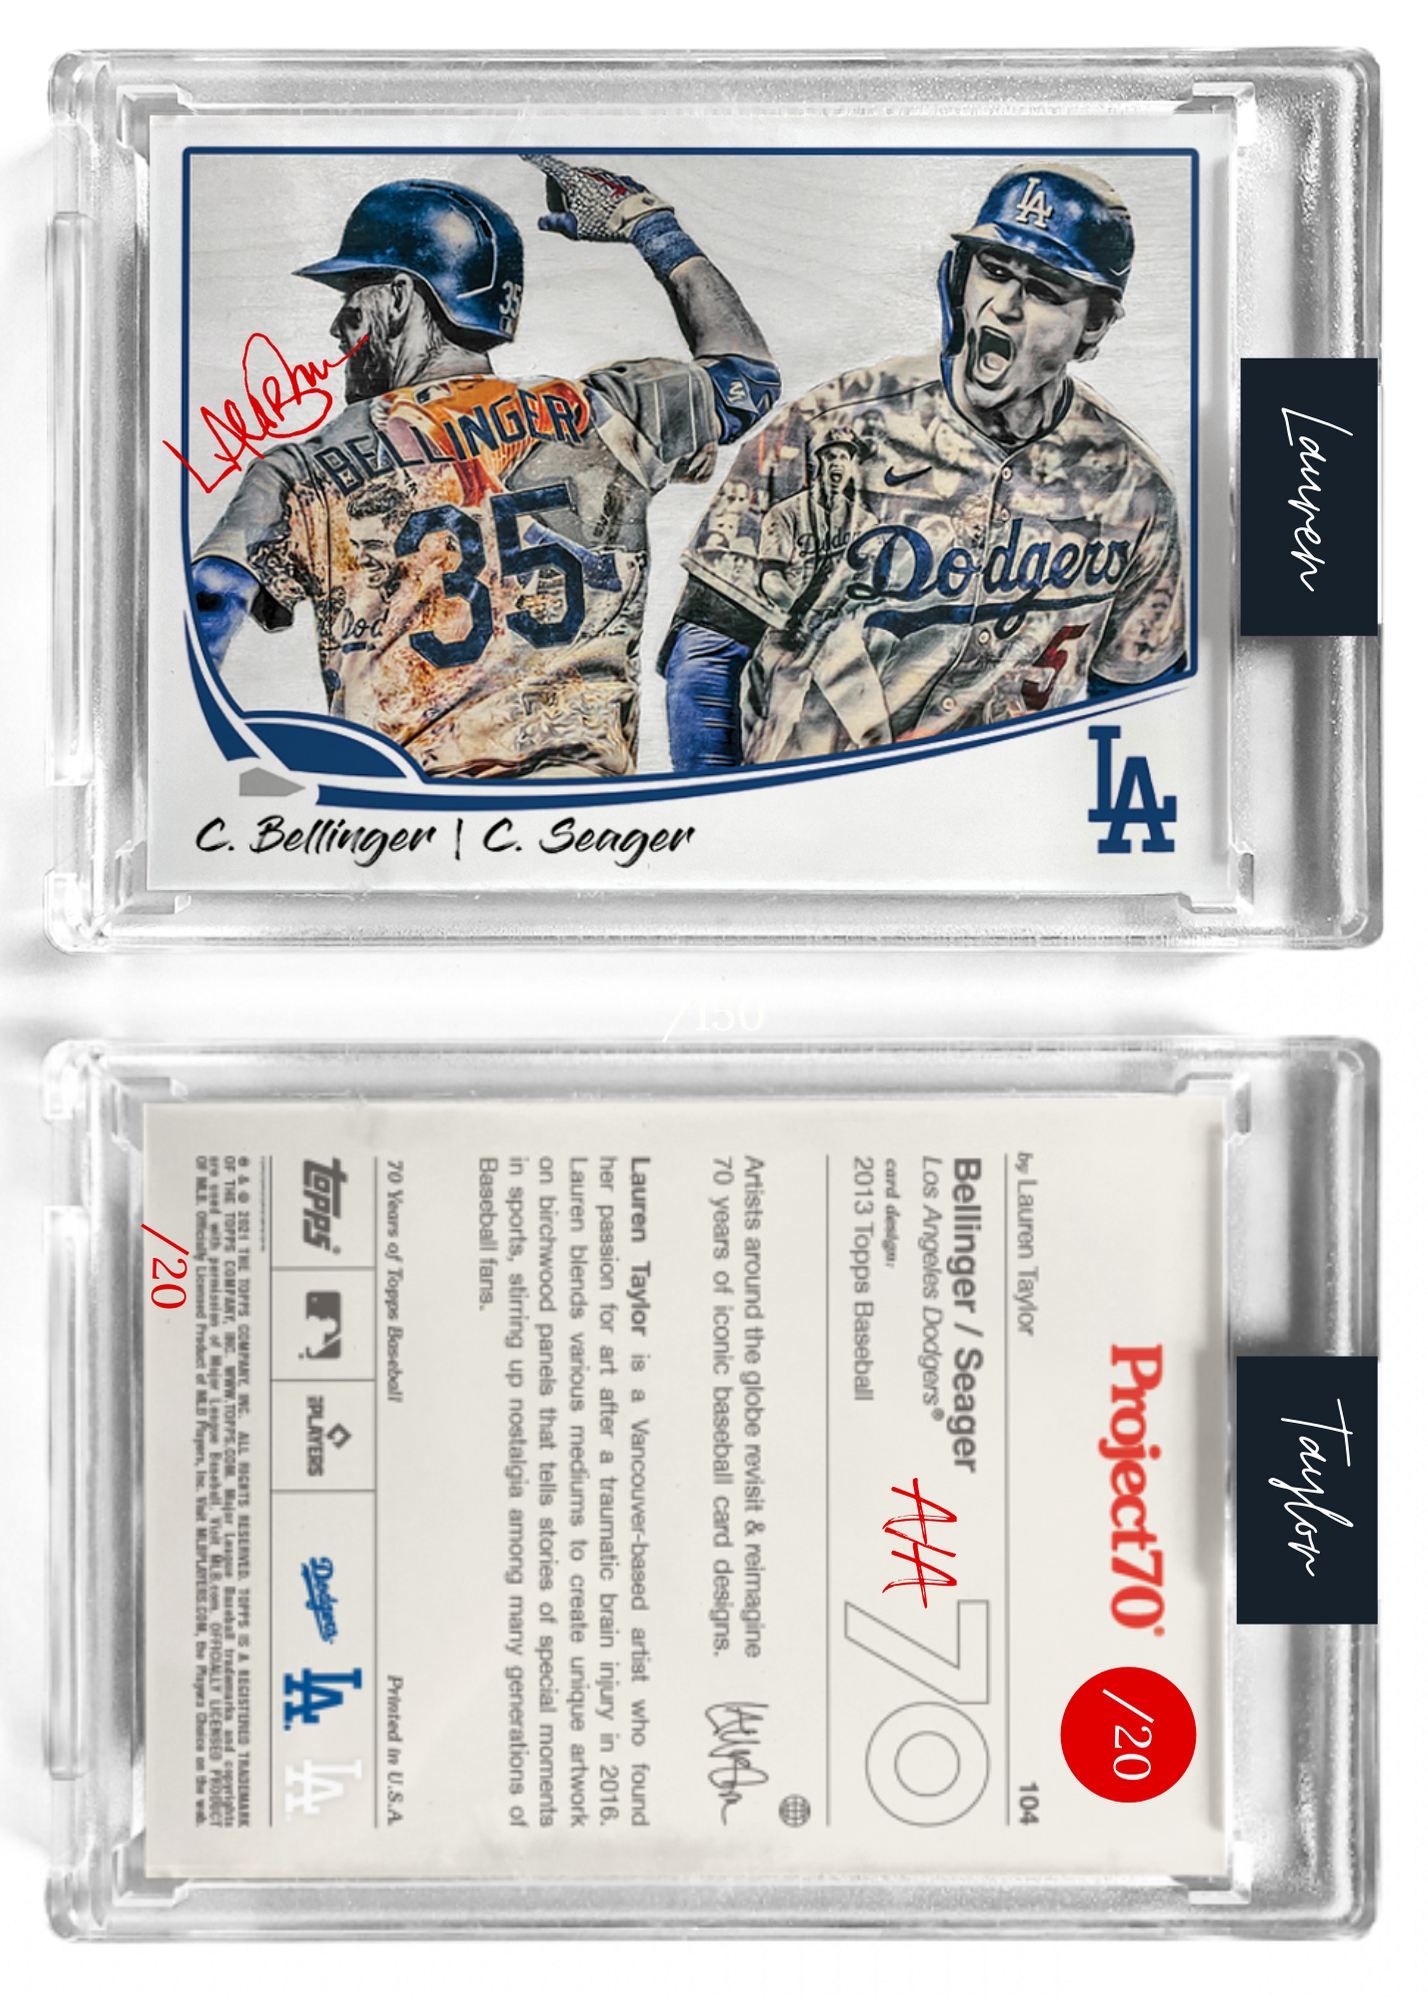 /20 Red Artist Signature - Topps Project 70 130pt card #104 by Lauren Taylor - Cody Bellinger / Corey Seager